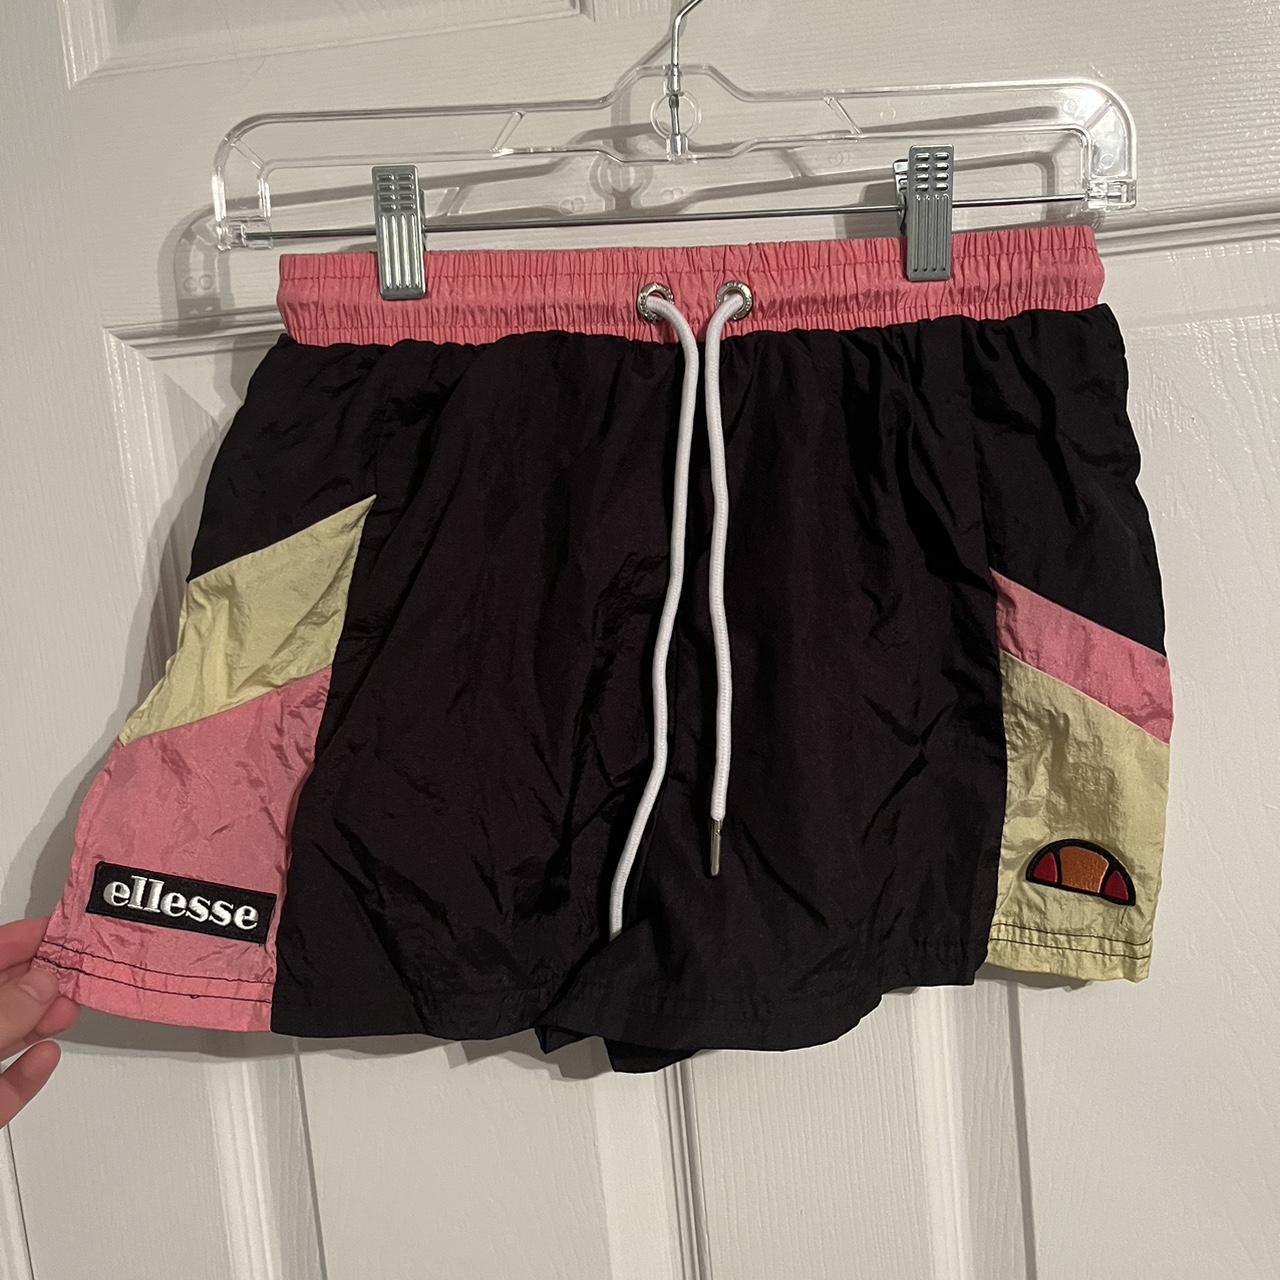 Ellesse Women's Pink and Yellow Shorts